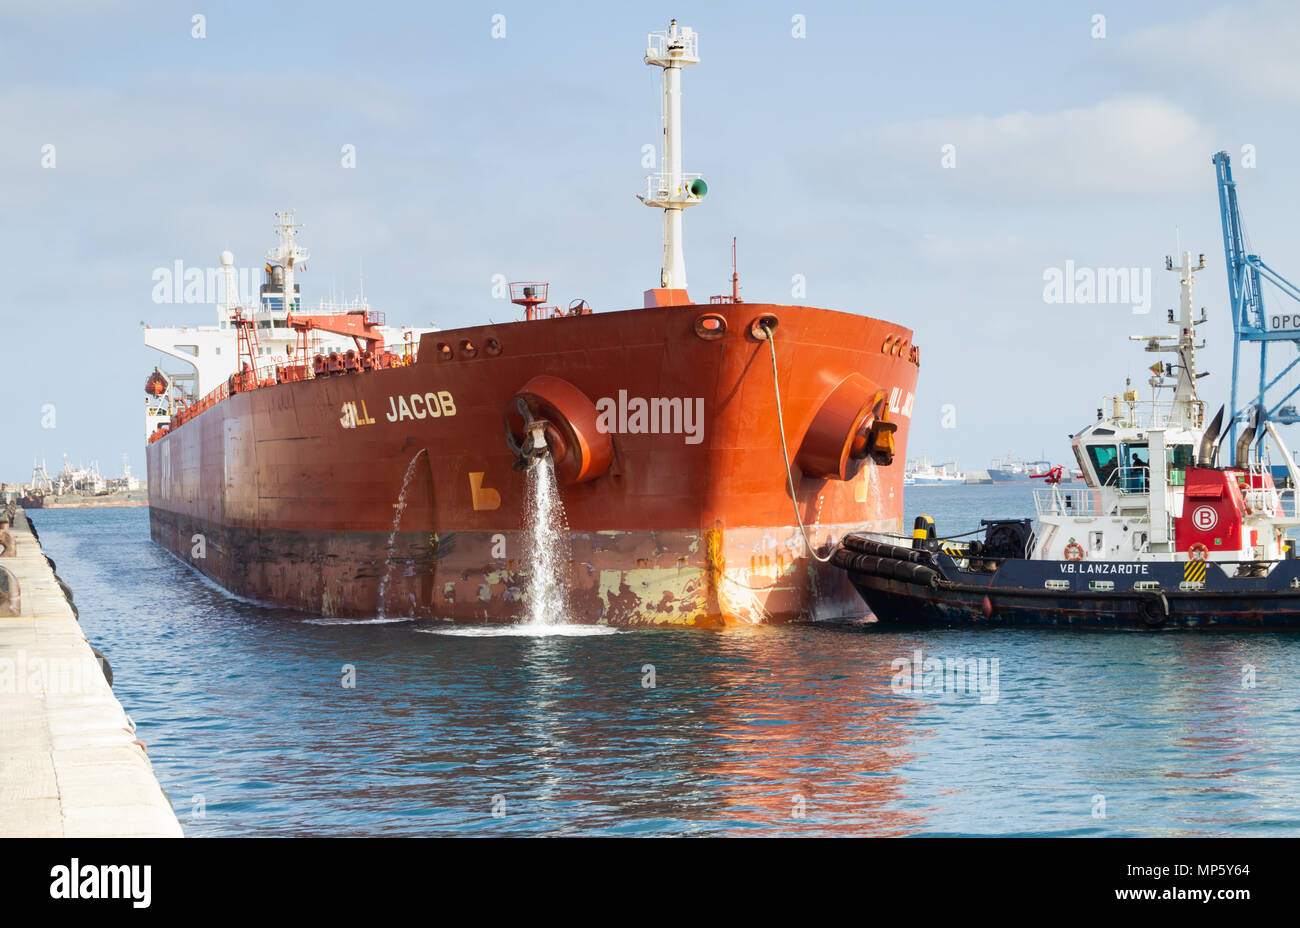 Oil tanker pumping ballast water as tug boat guides ship onto berth in port Stock Photo